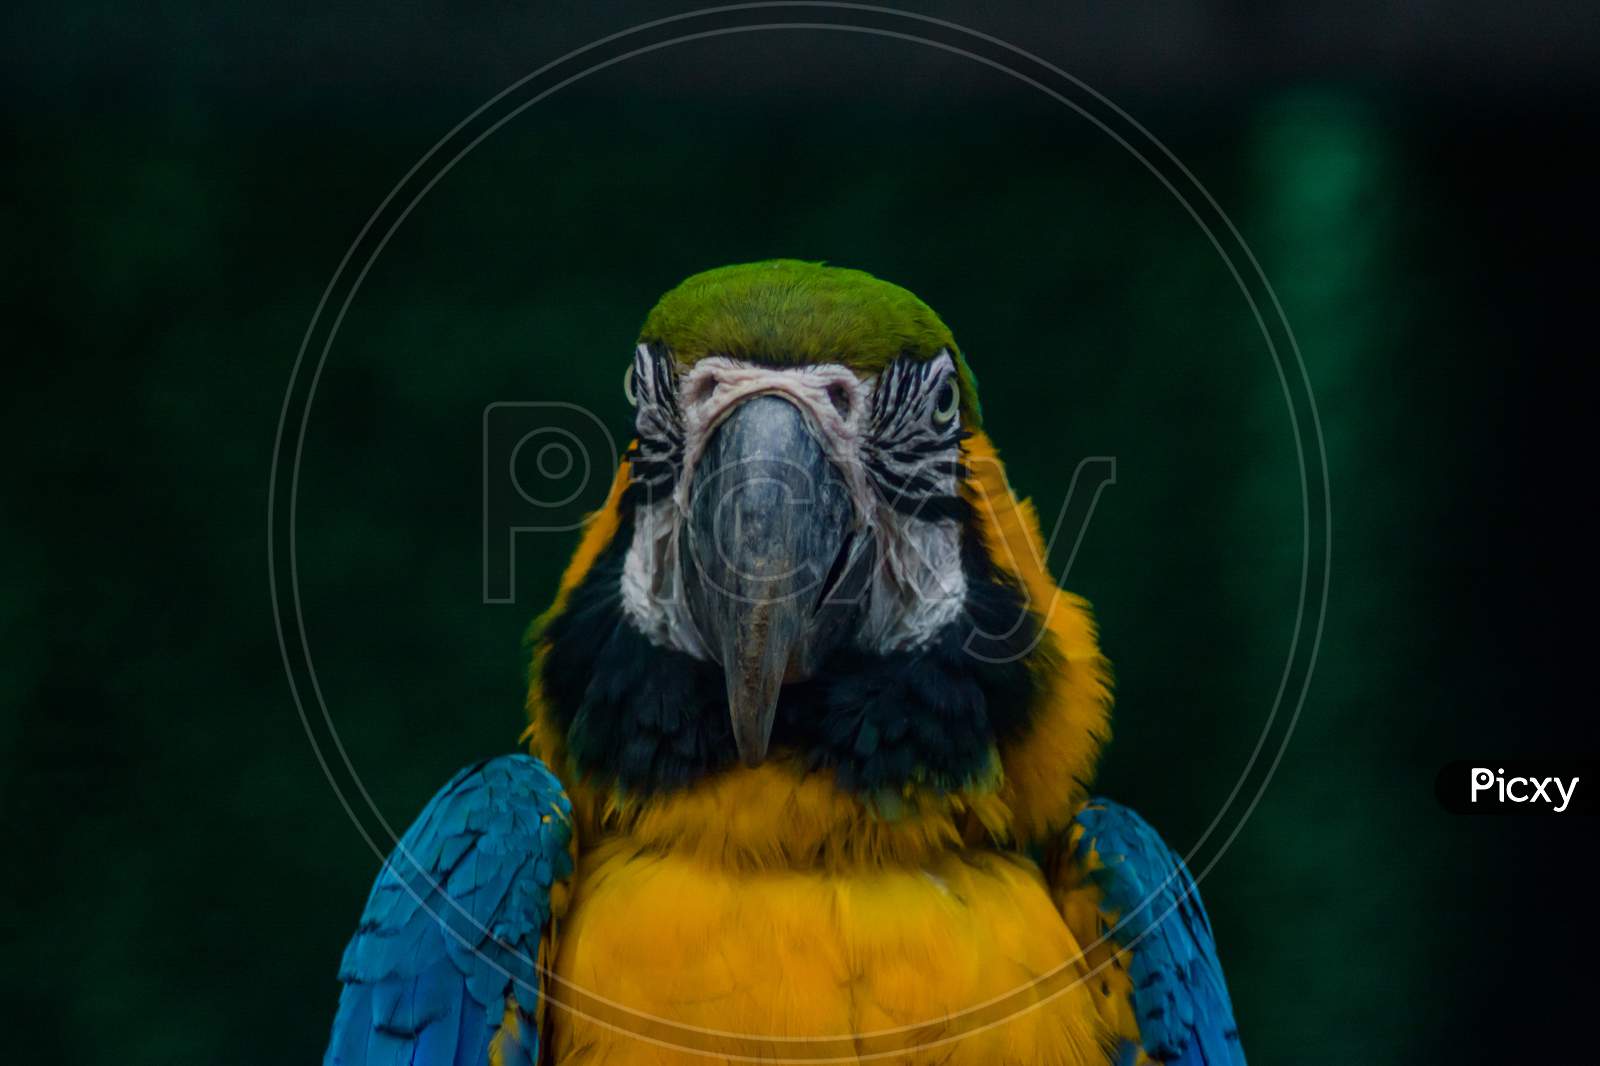 Parrots, also known as psittacines, are birds of the roughly 393 species in 92 genera comprising the order Psittaciformes.